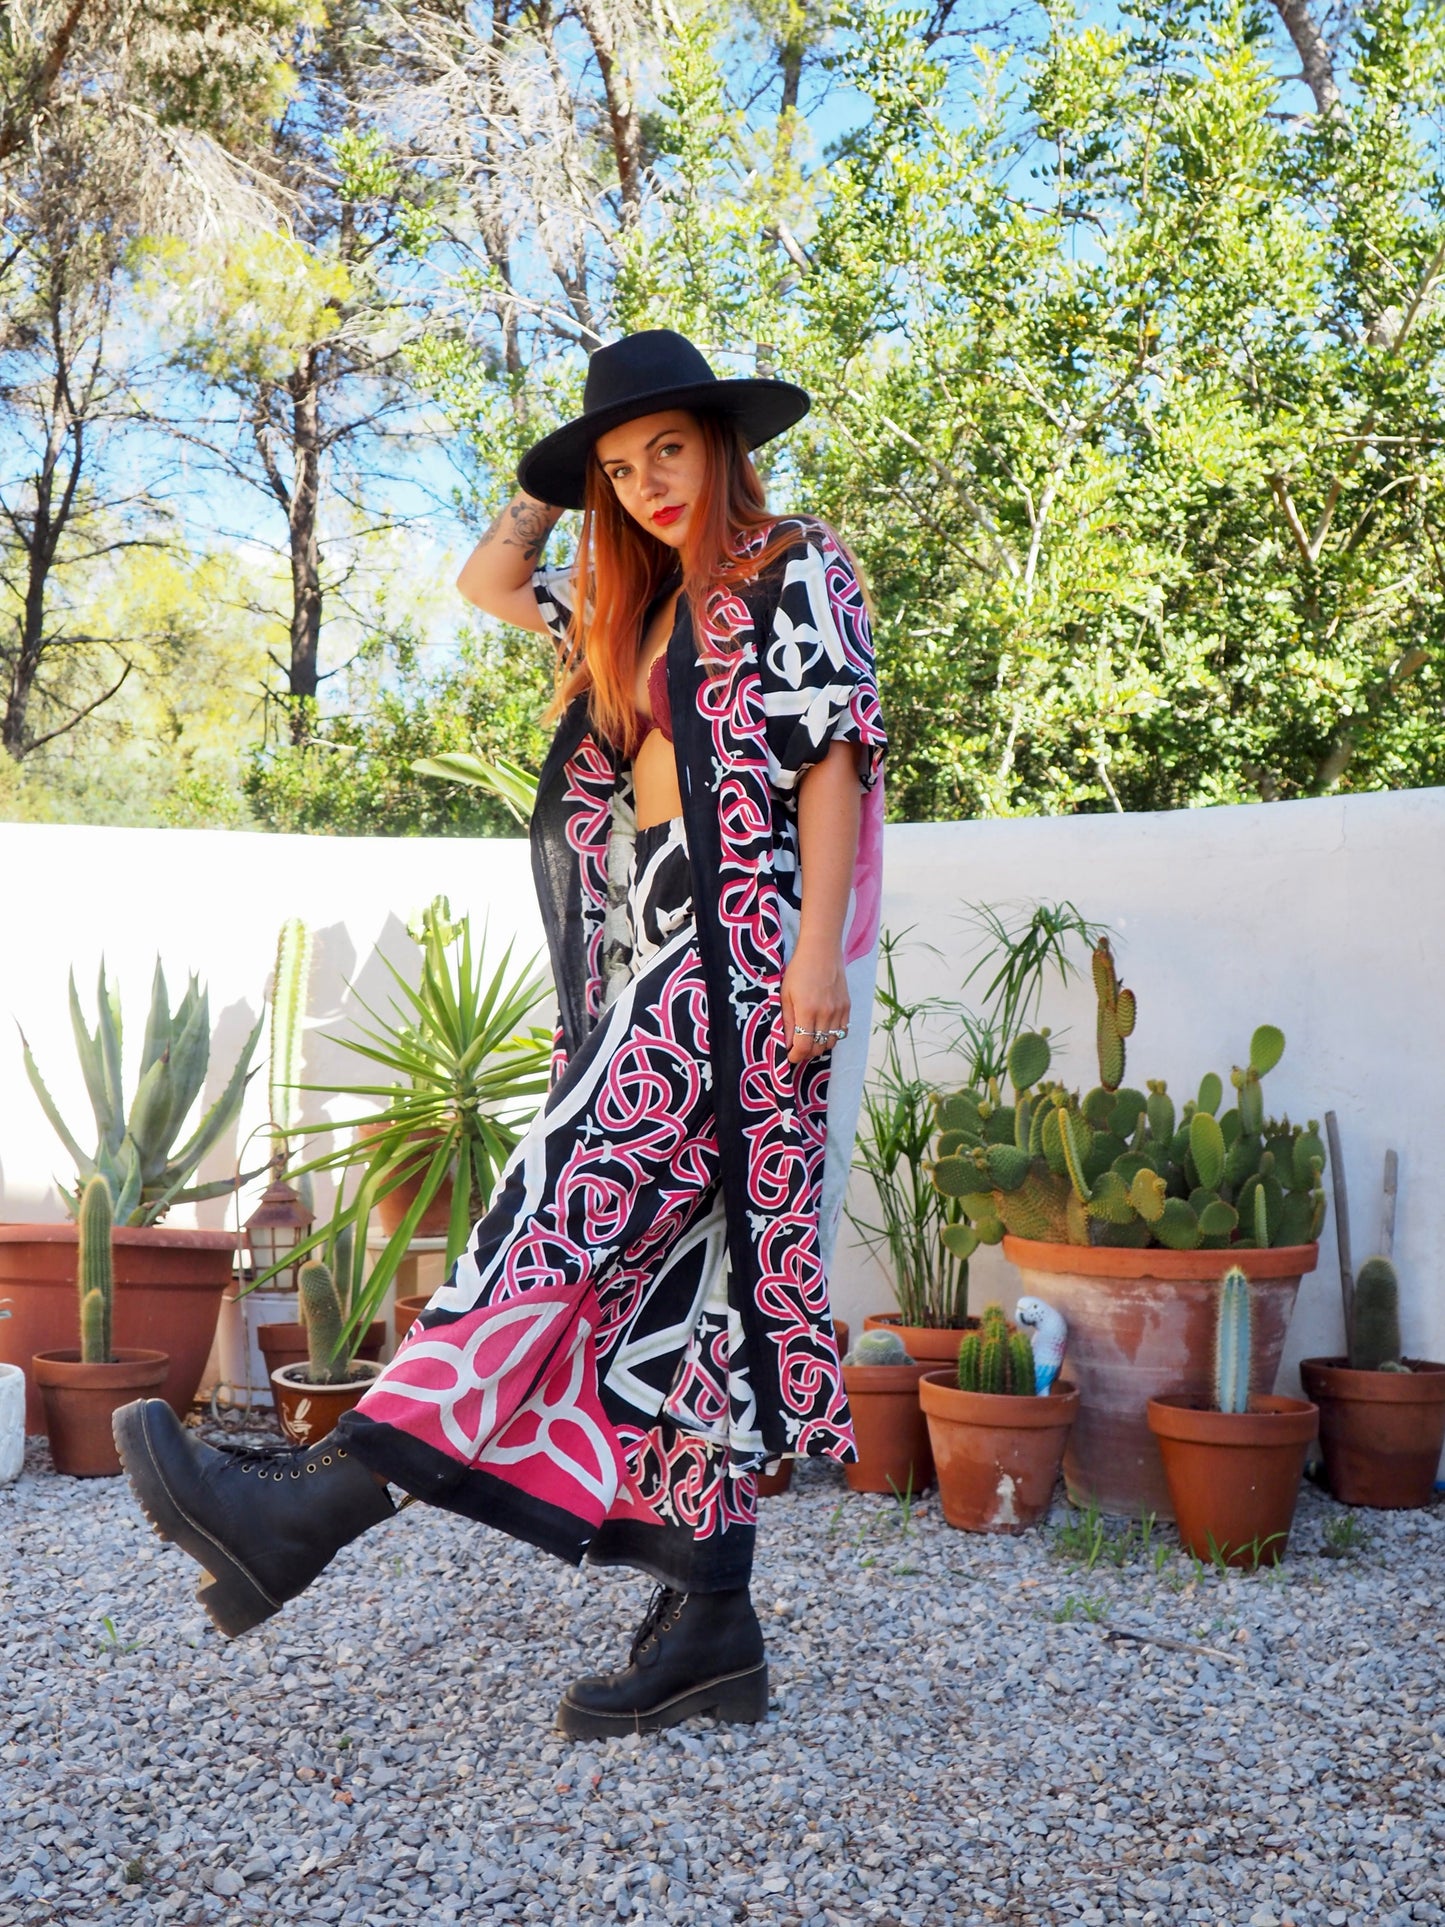 Long oversized waistcoat jacket up-cycled by Vagabond Ibiza from screen printed cotton textiles super cool.